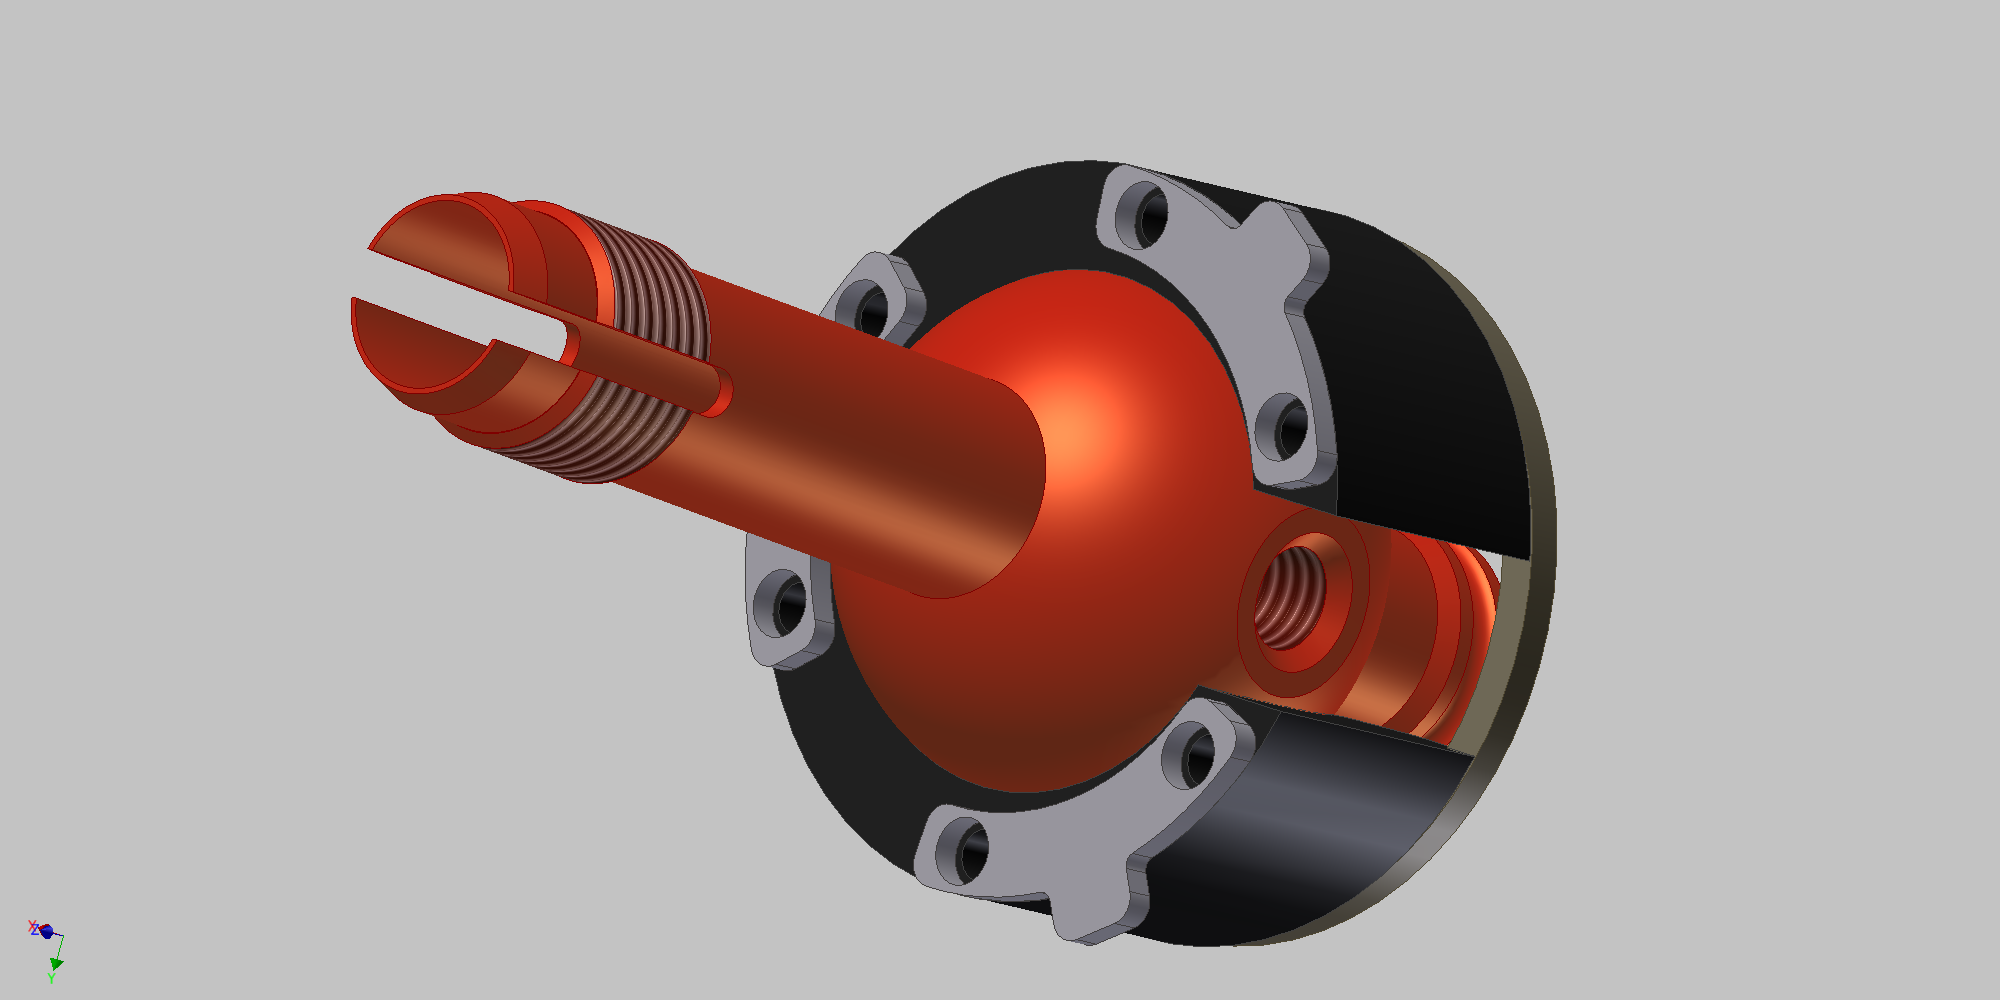 A render of the assembly with the final lock design.